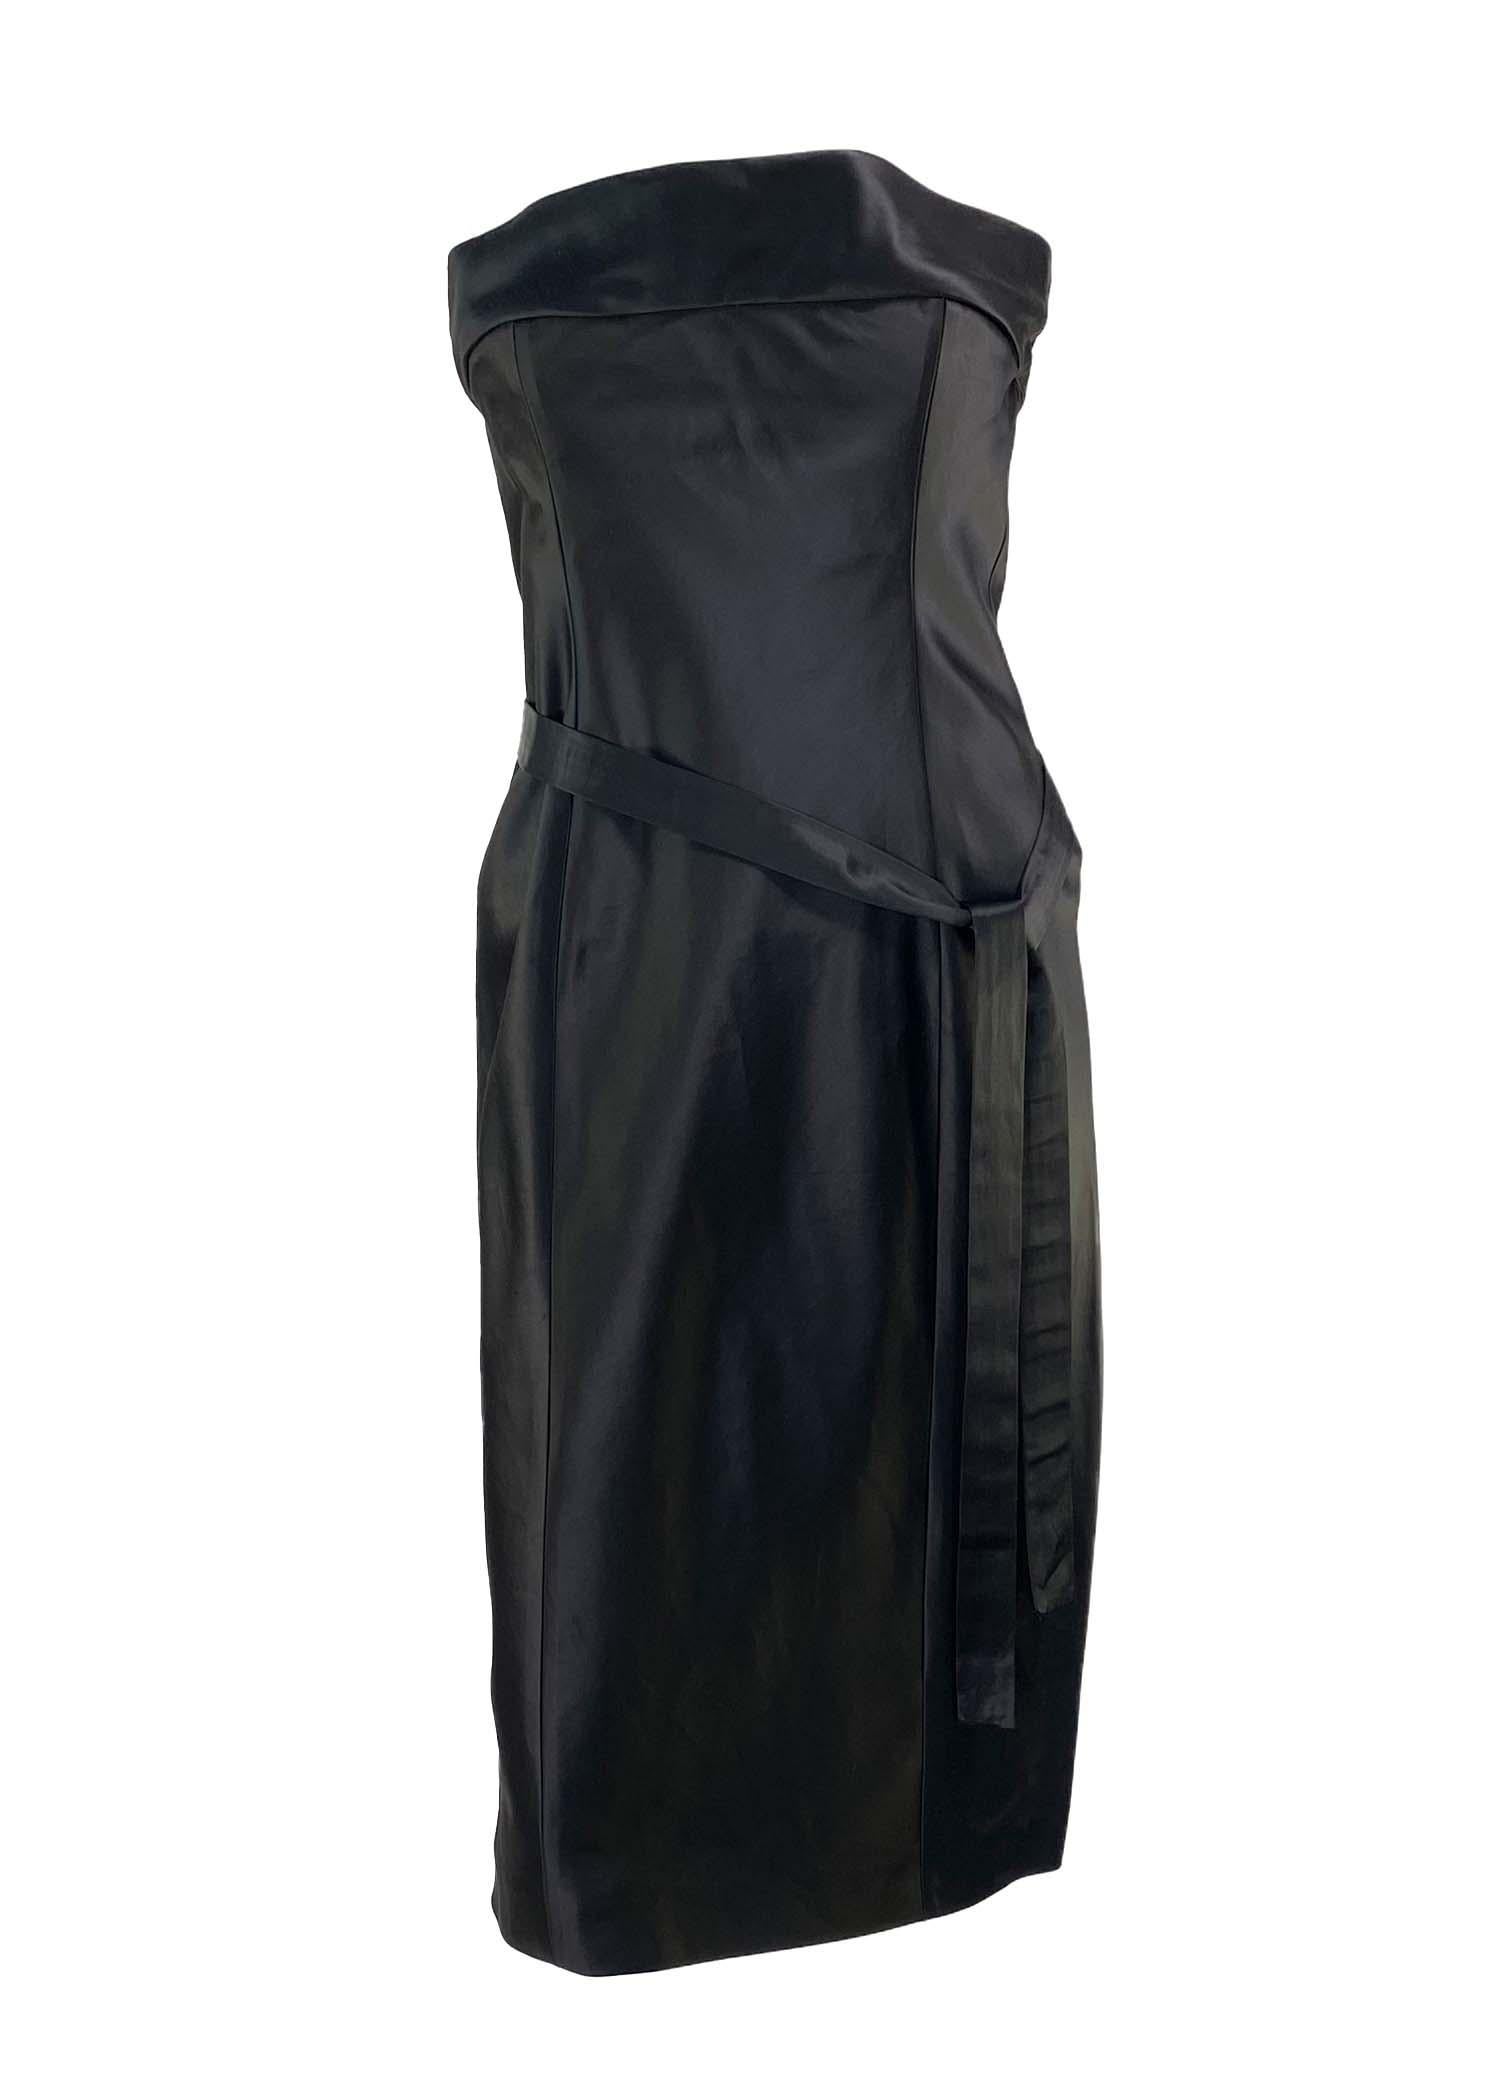 S/S 2001 Gucci by Tom Ford Corseted Black Satin Strapless Tube Dress Runway  In Excellent Condition In West Hollywood, CA